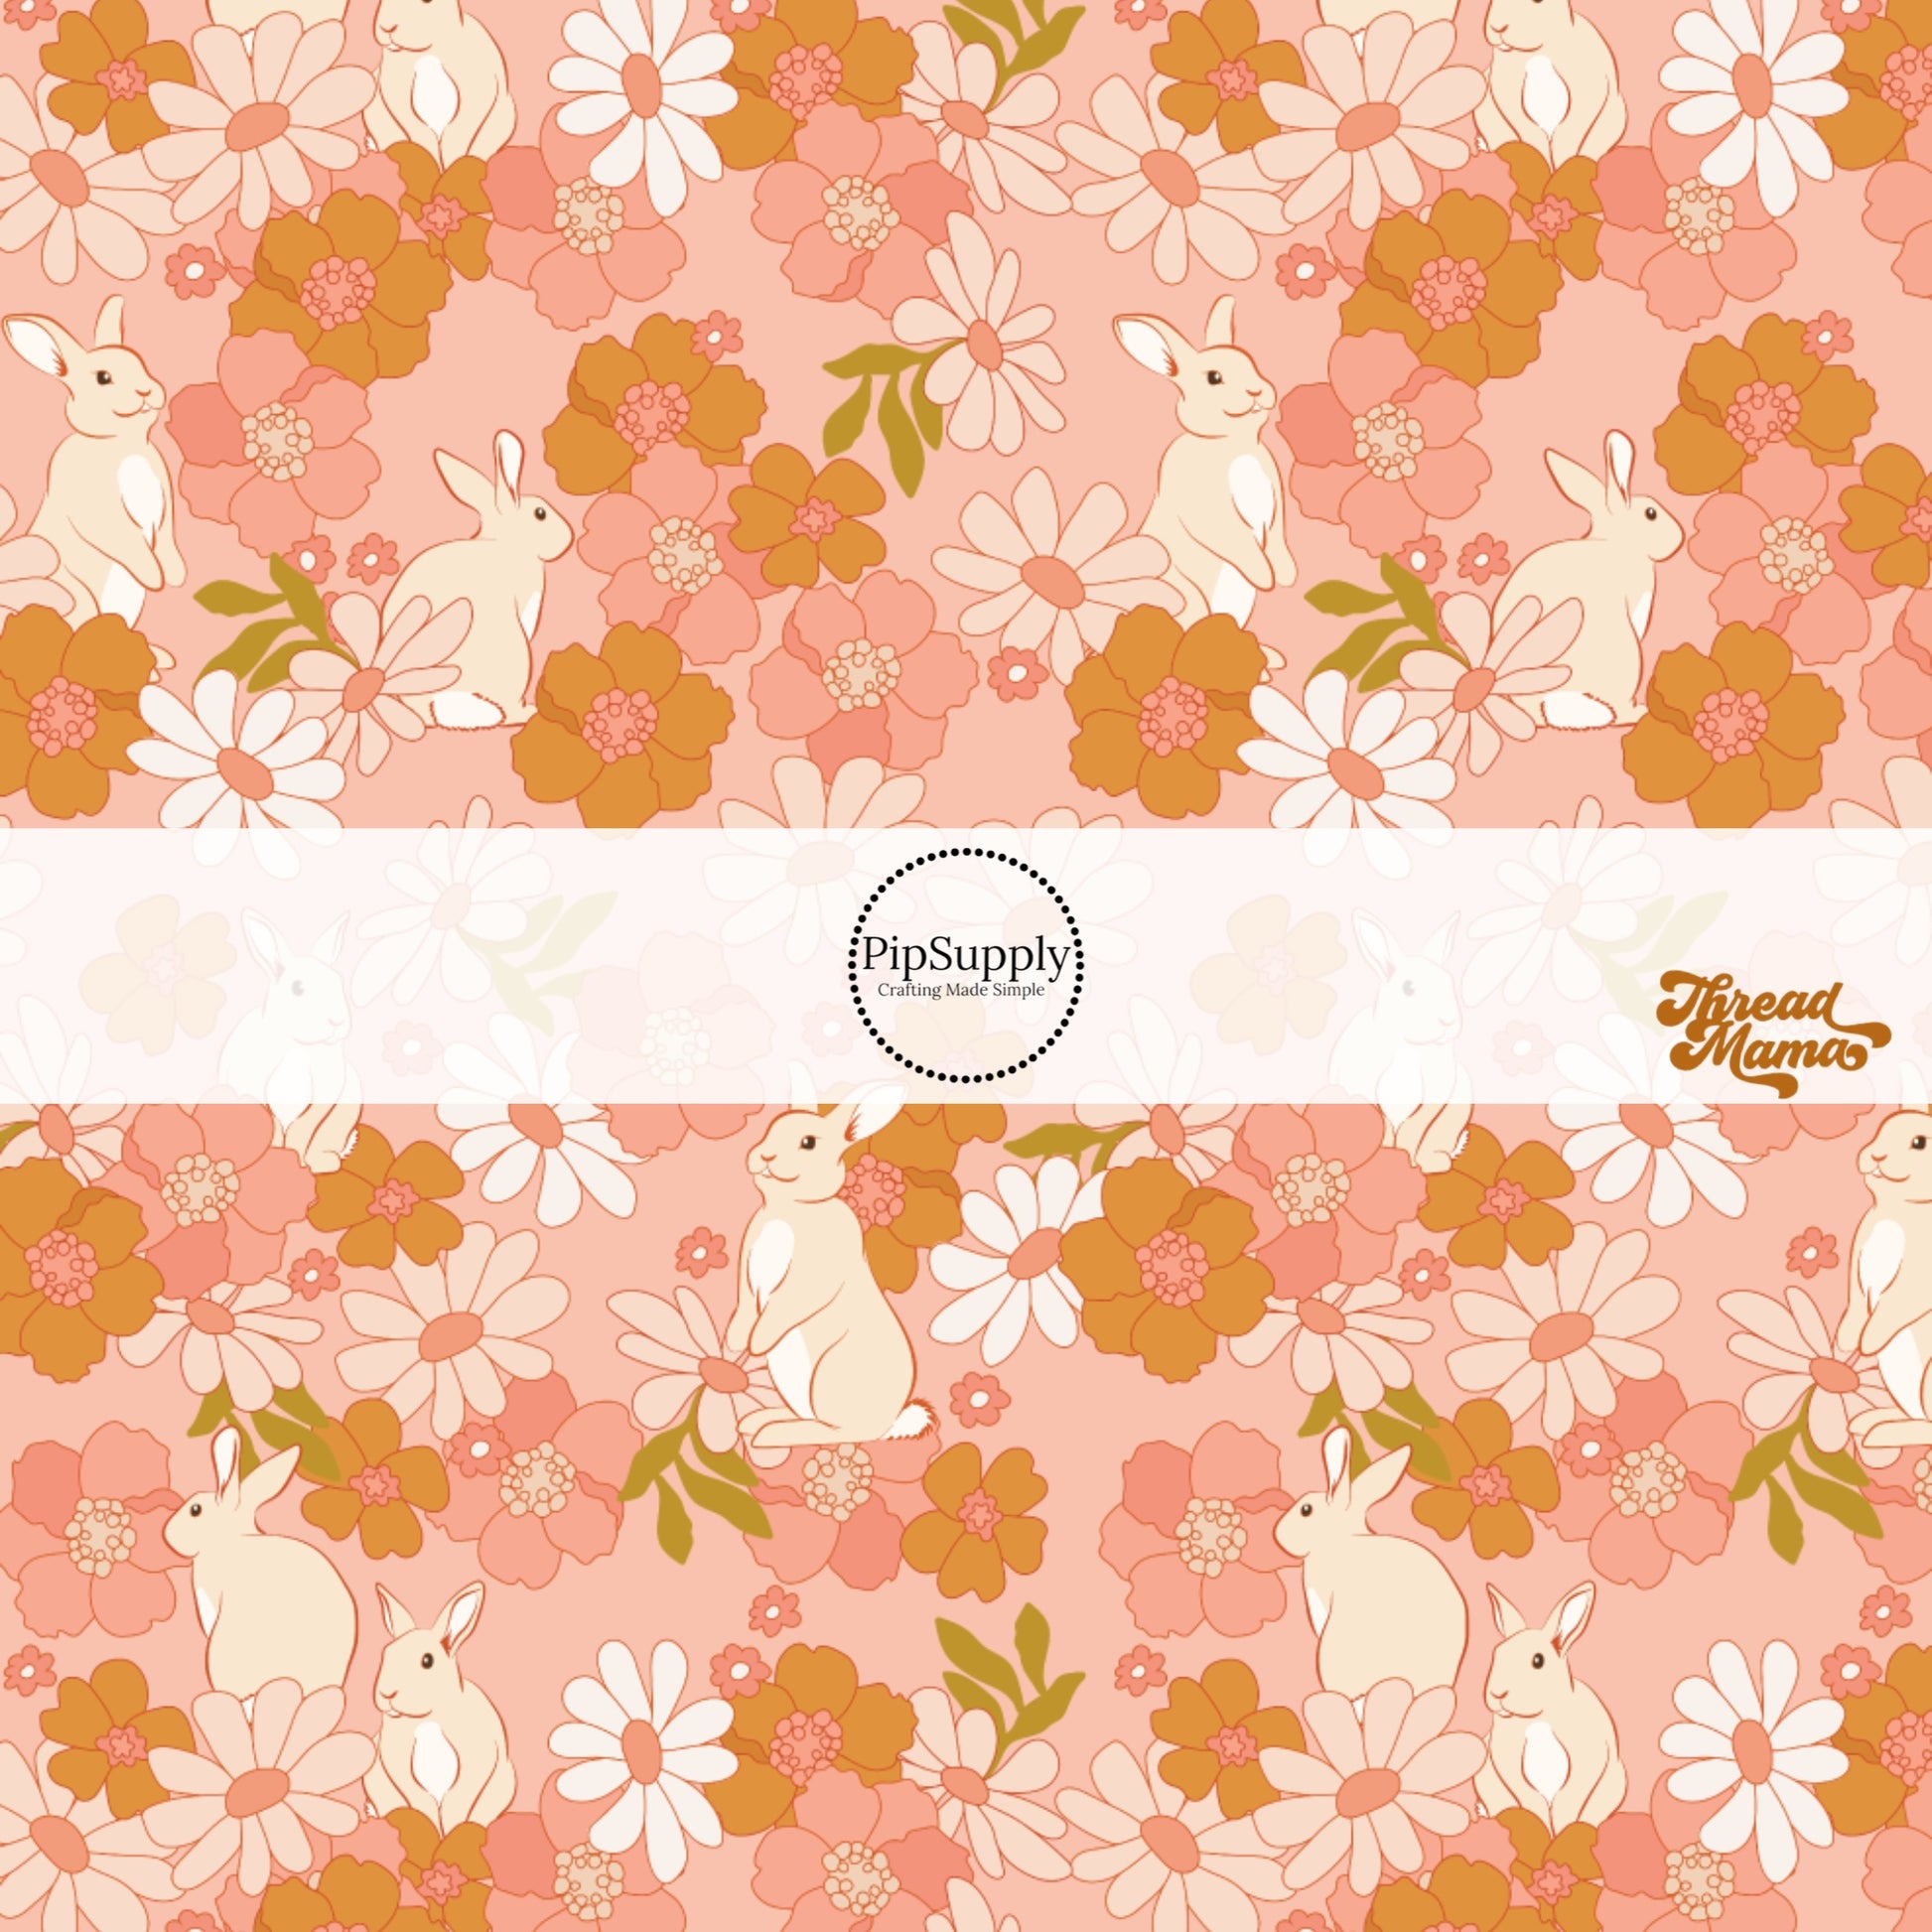 White, rust, and pink flowers with a white bunny bow strip